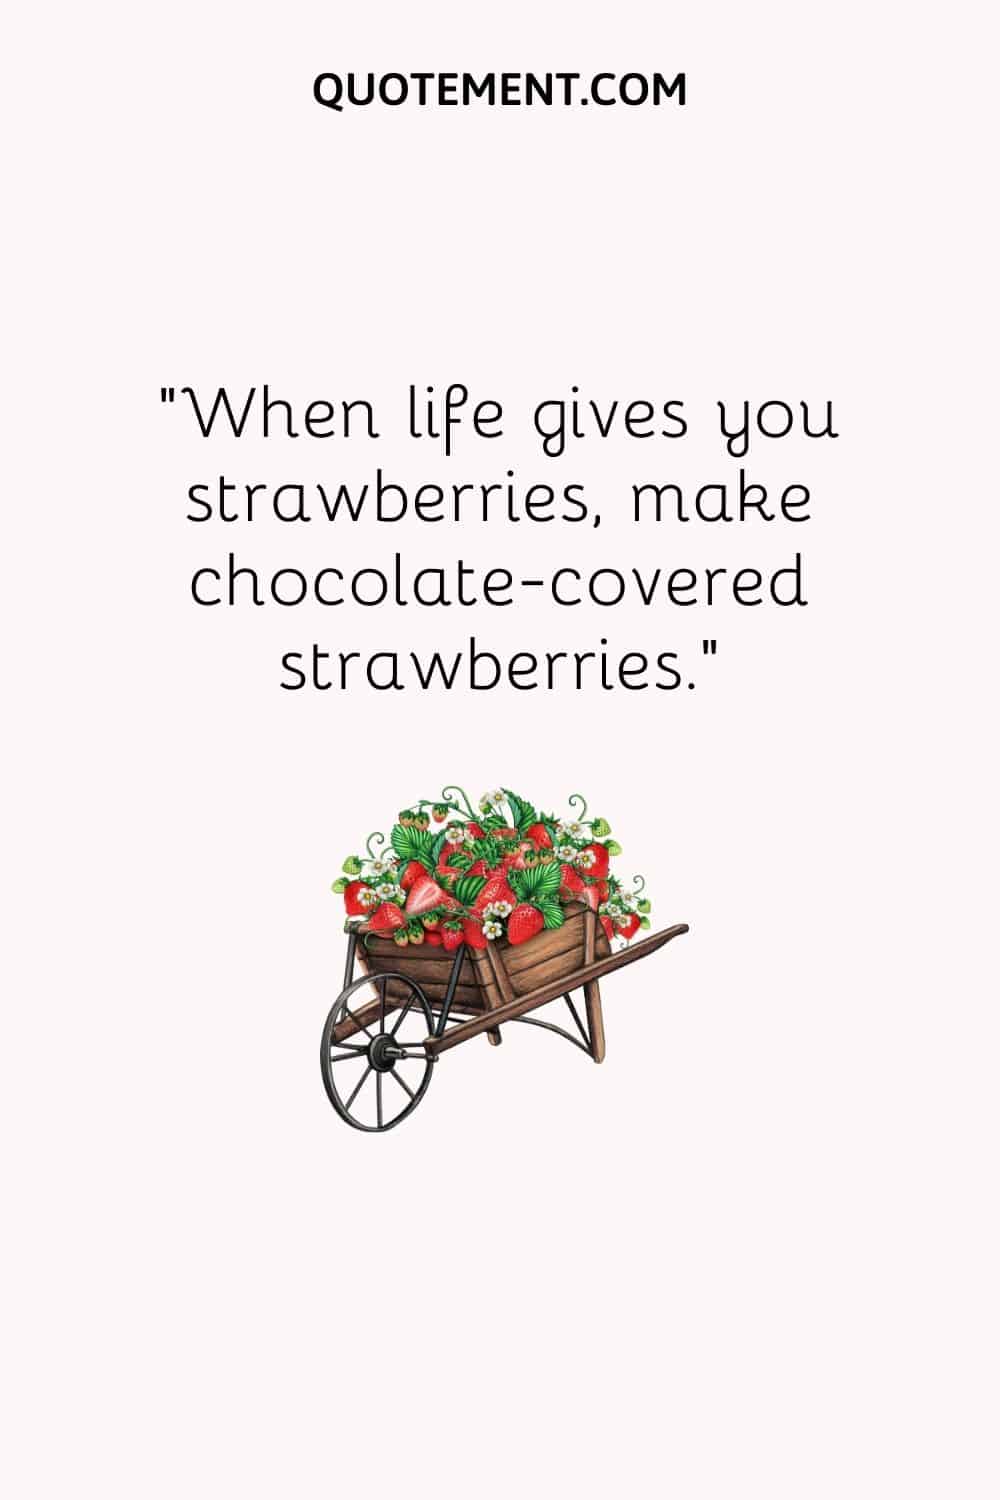 When life gives you strawberries, make chocolate-covered strawberries